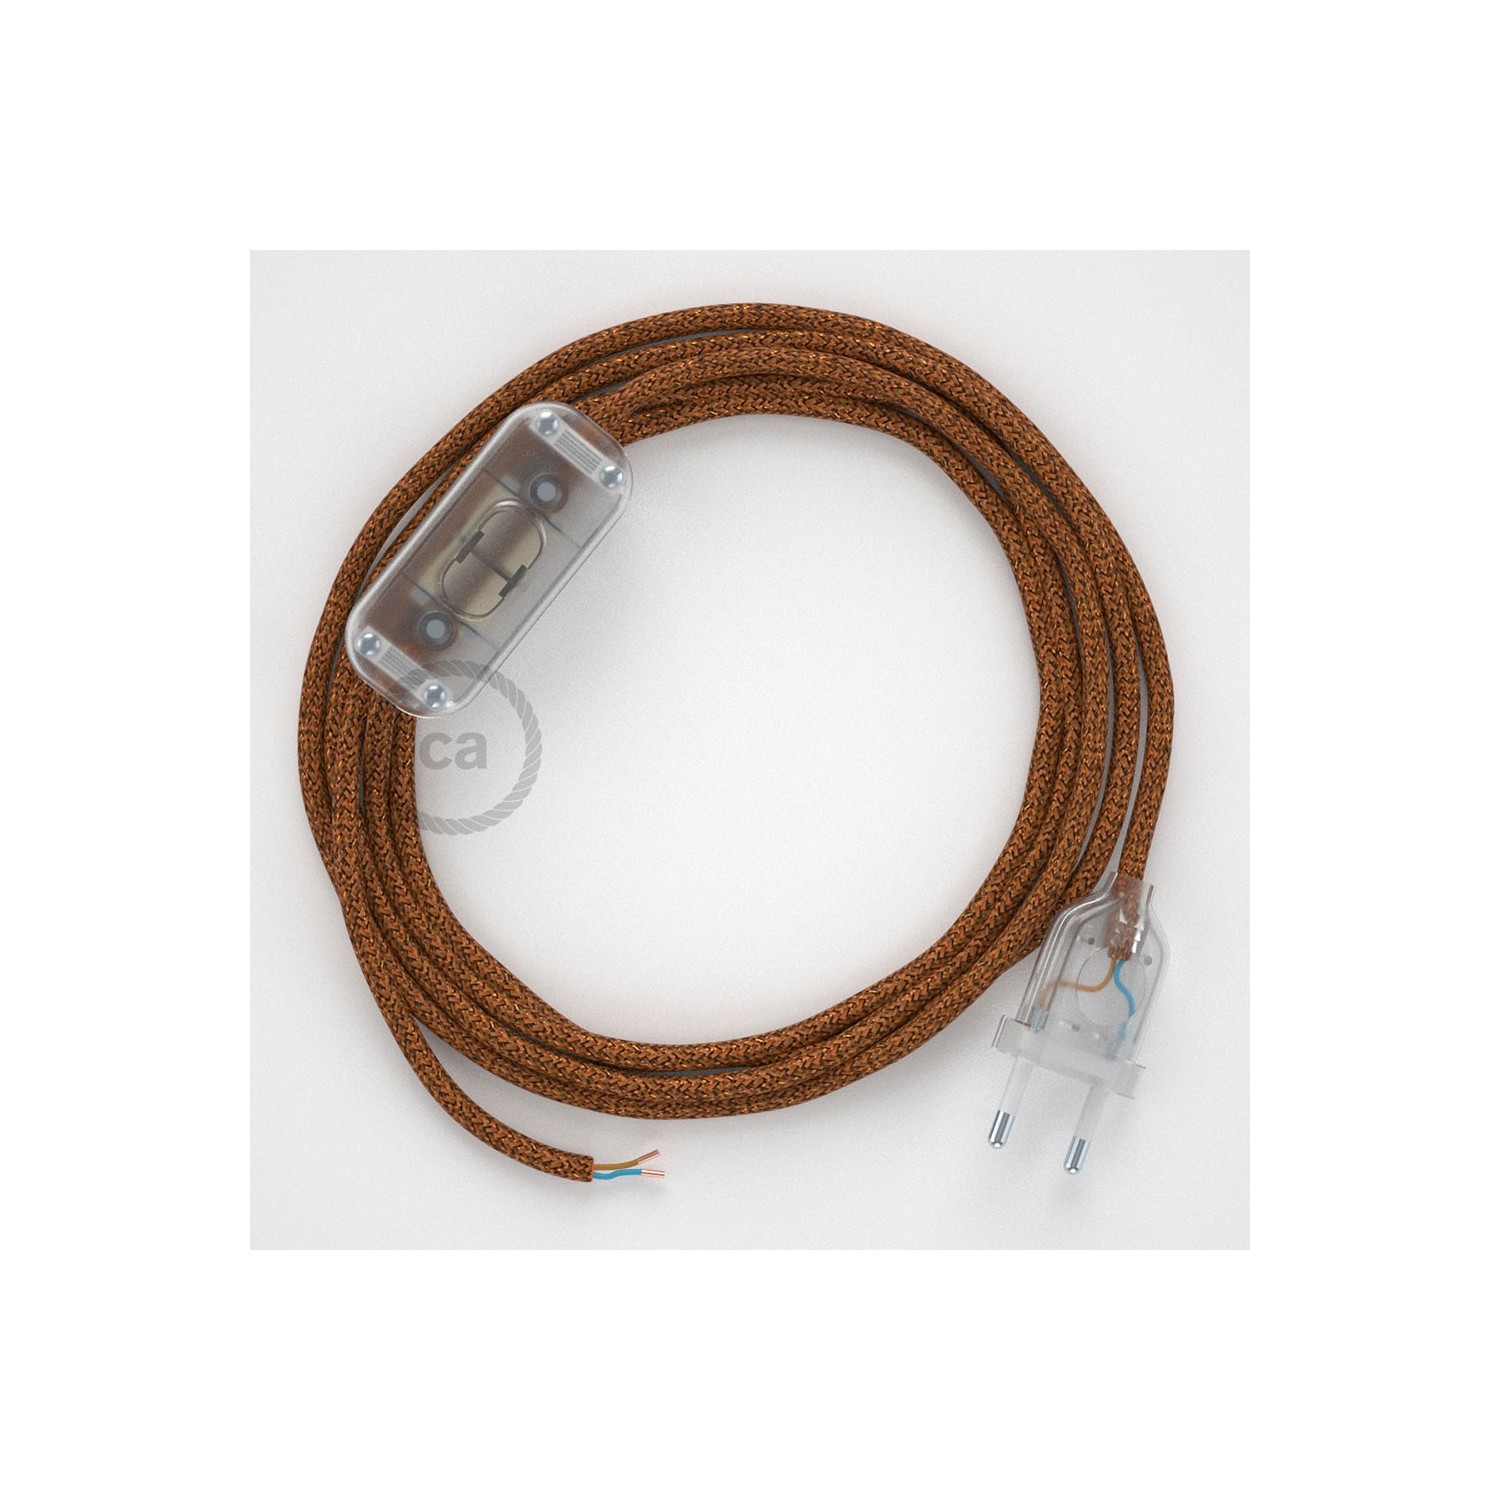 Lamp wiring, RL22 Sparkly Copper Rayon 1,80 m. Choose the colour of the switch and plug.